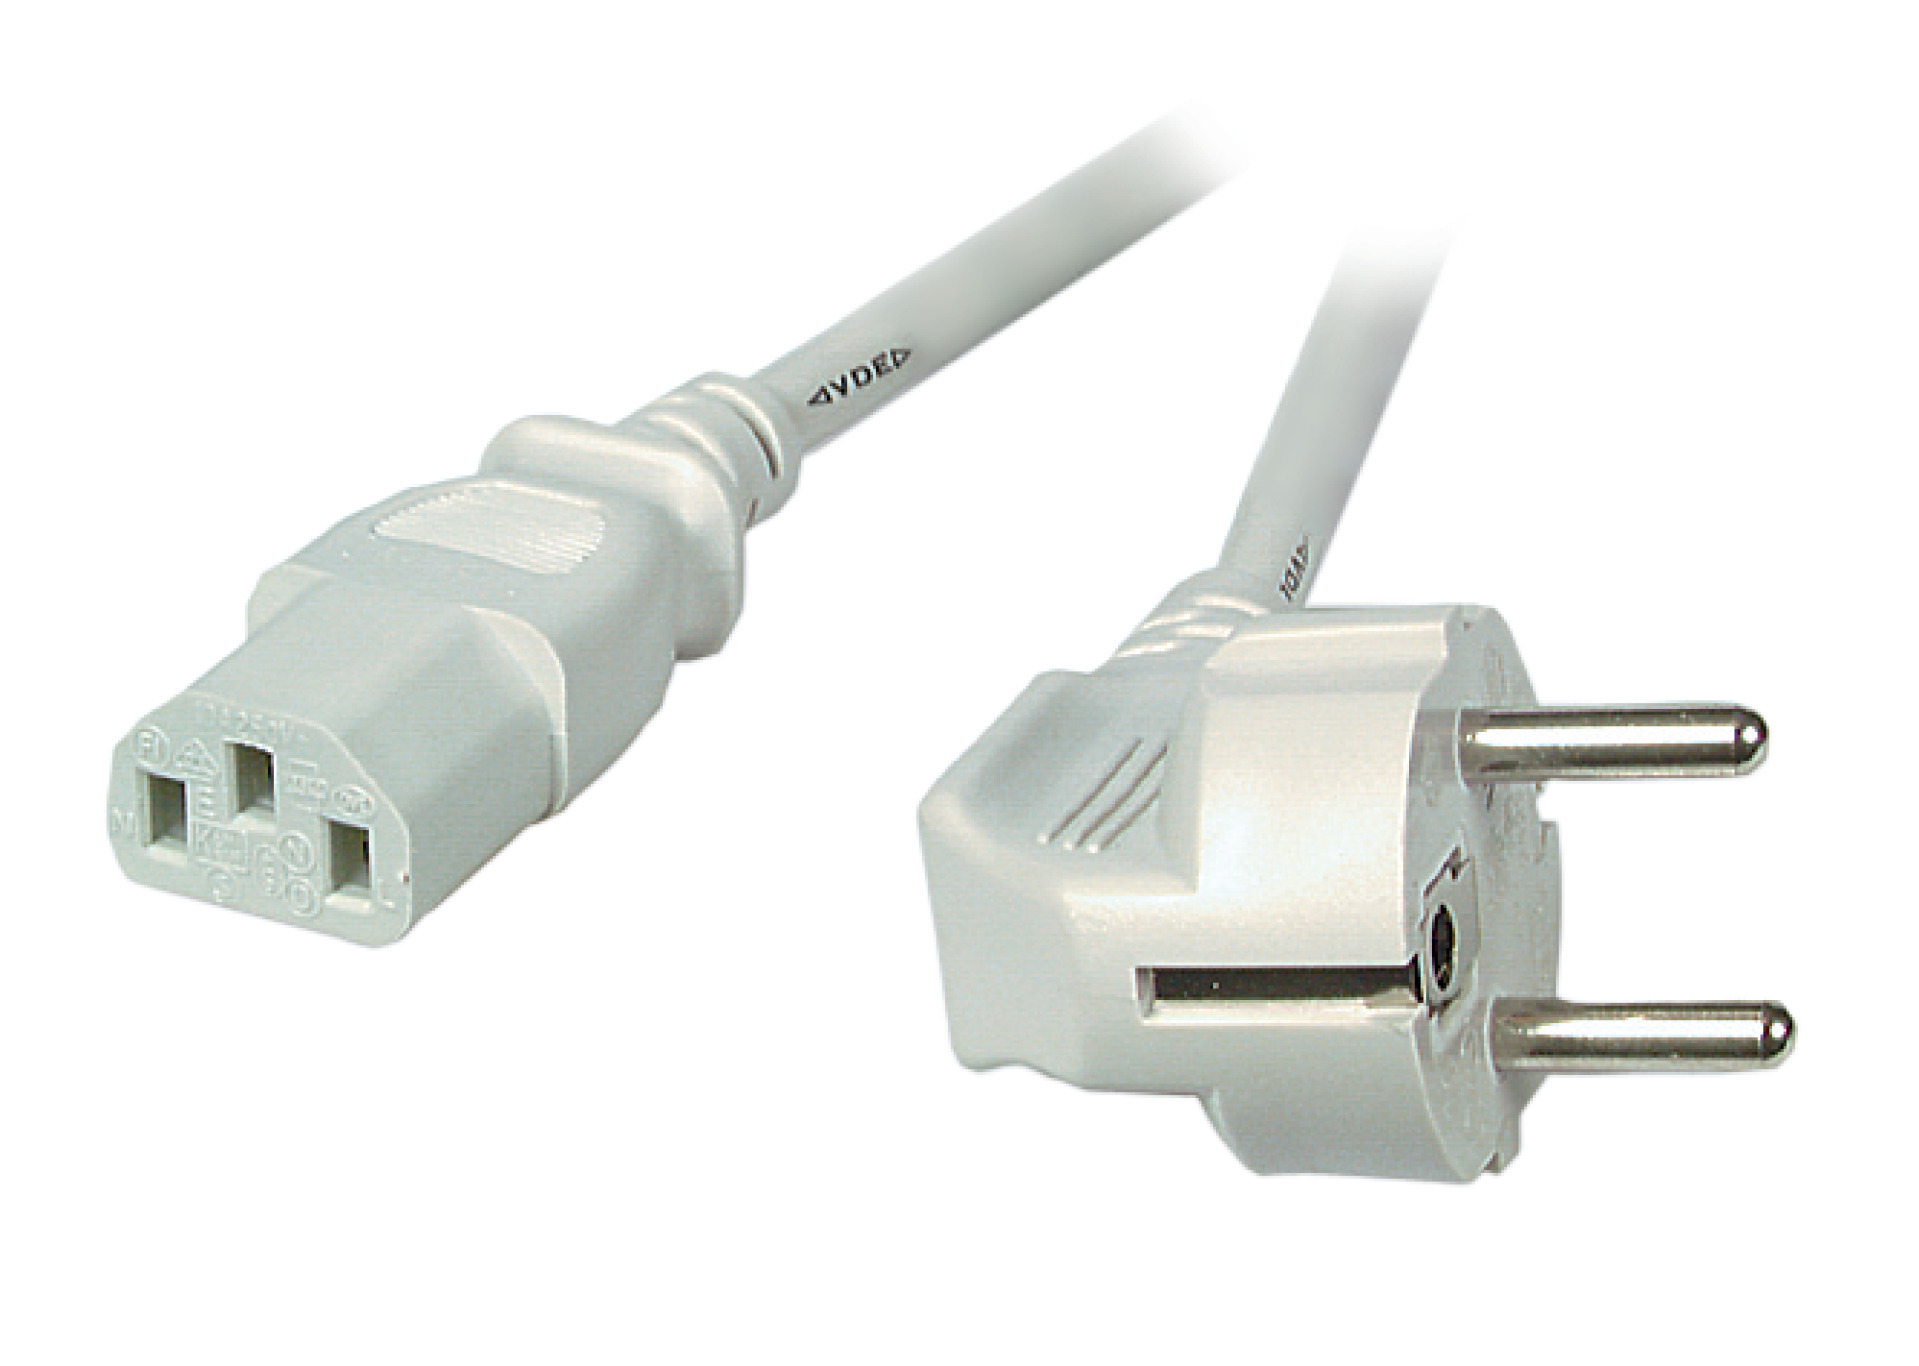 Power Cable CEE7/7 90° - C13 180°, Grey, 2.5 m, 3 x 1.00 mm²